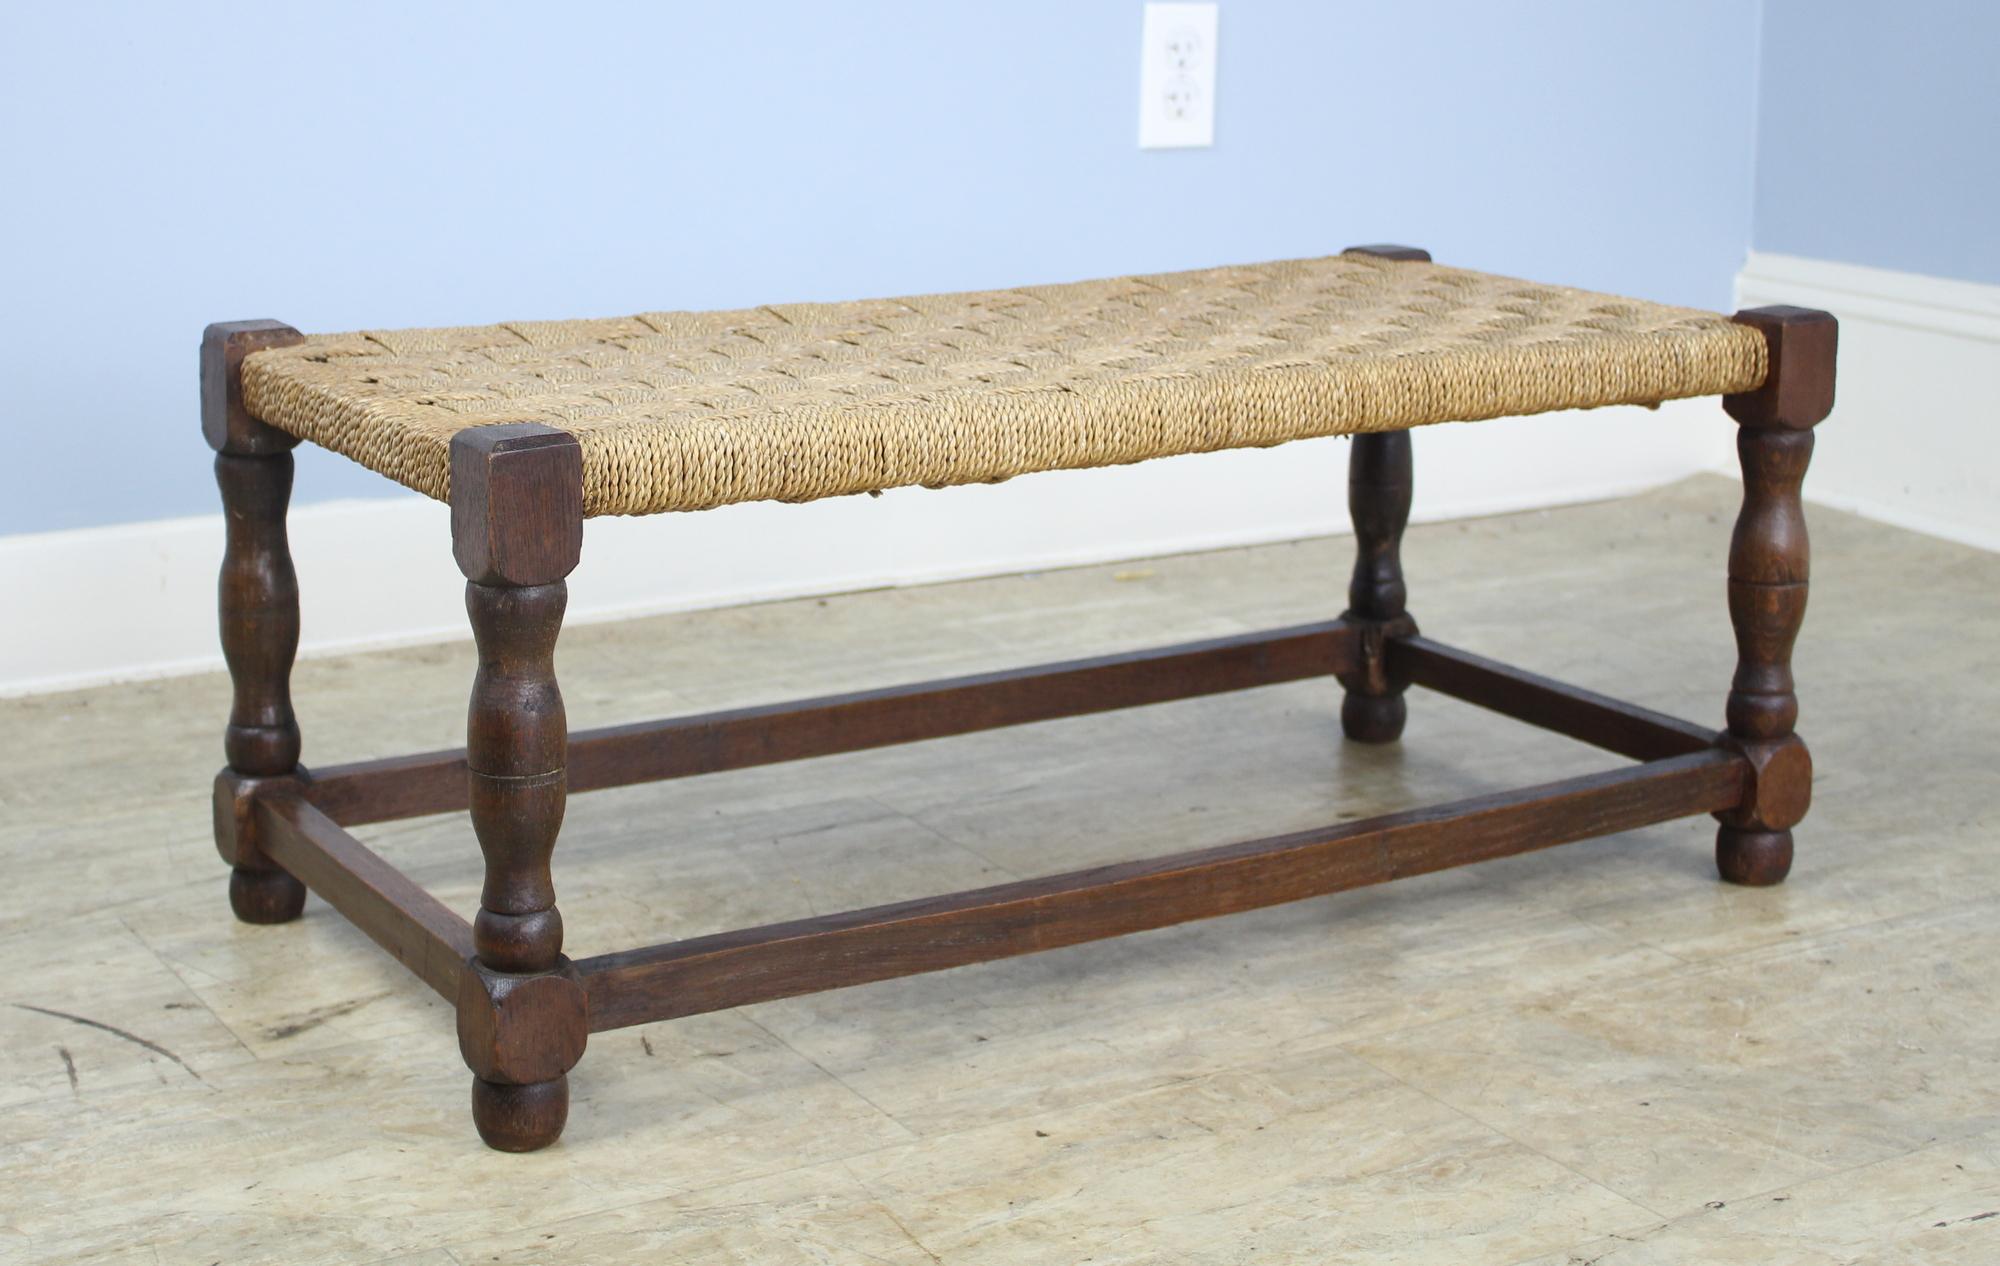 A sweet little oak string stool for the hallway, living room, child's bedroom, or as a perch next to the fireplace. The turned legs complete the look! Note: there is a small area of wear on the inside of one of the legs, as shown in image #7.